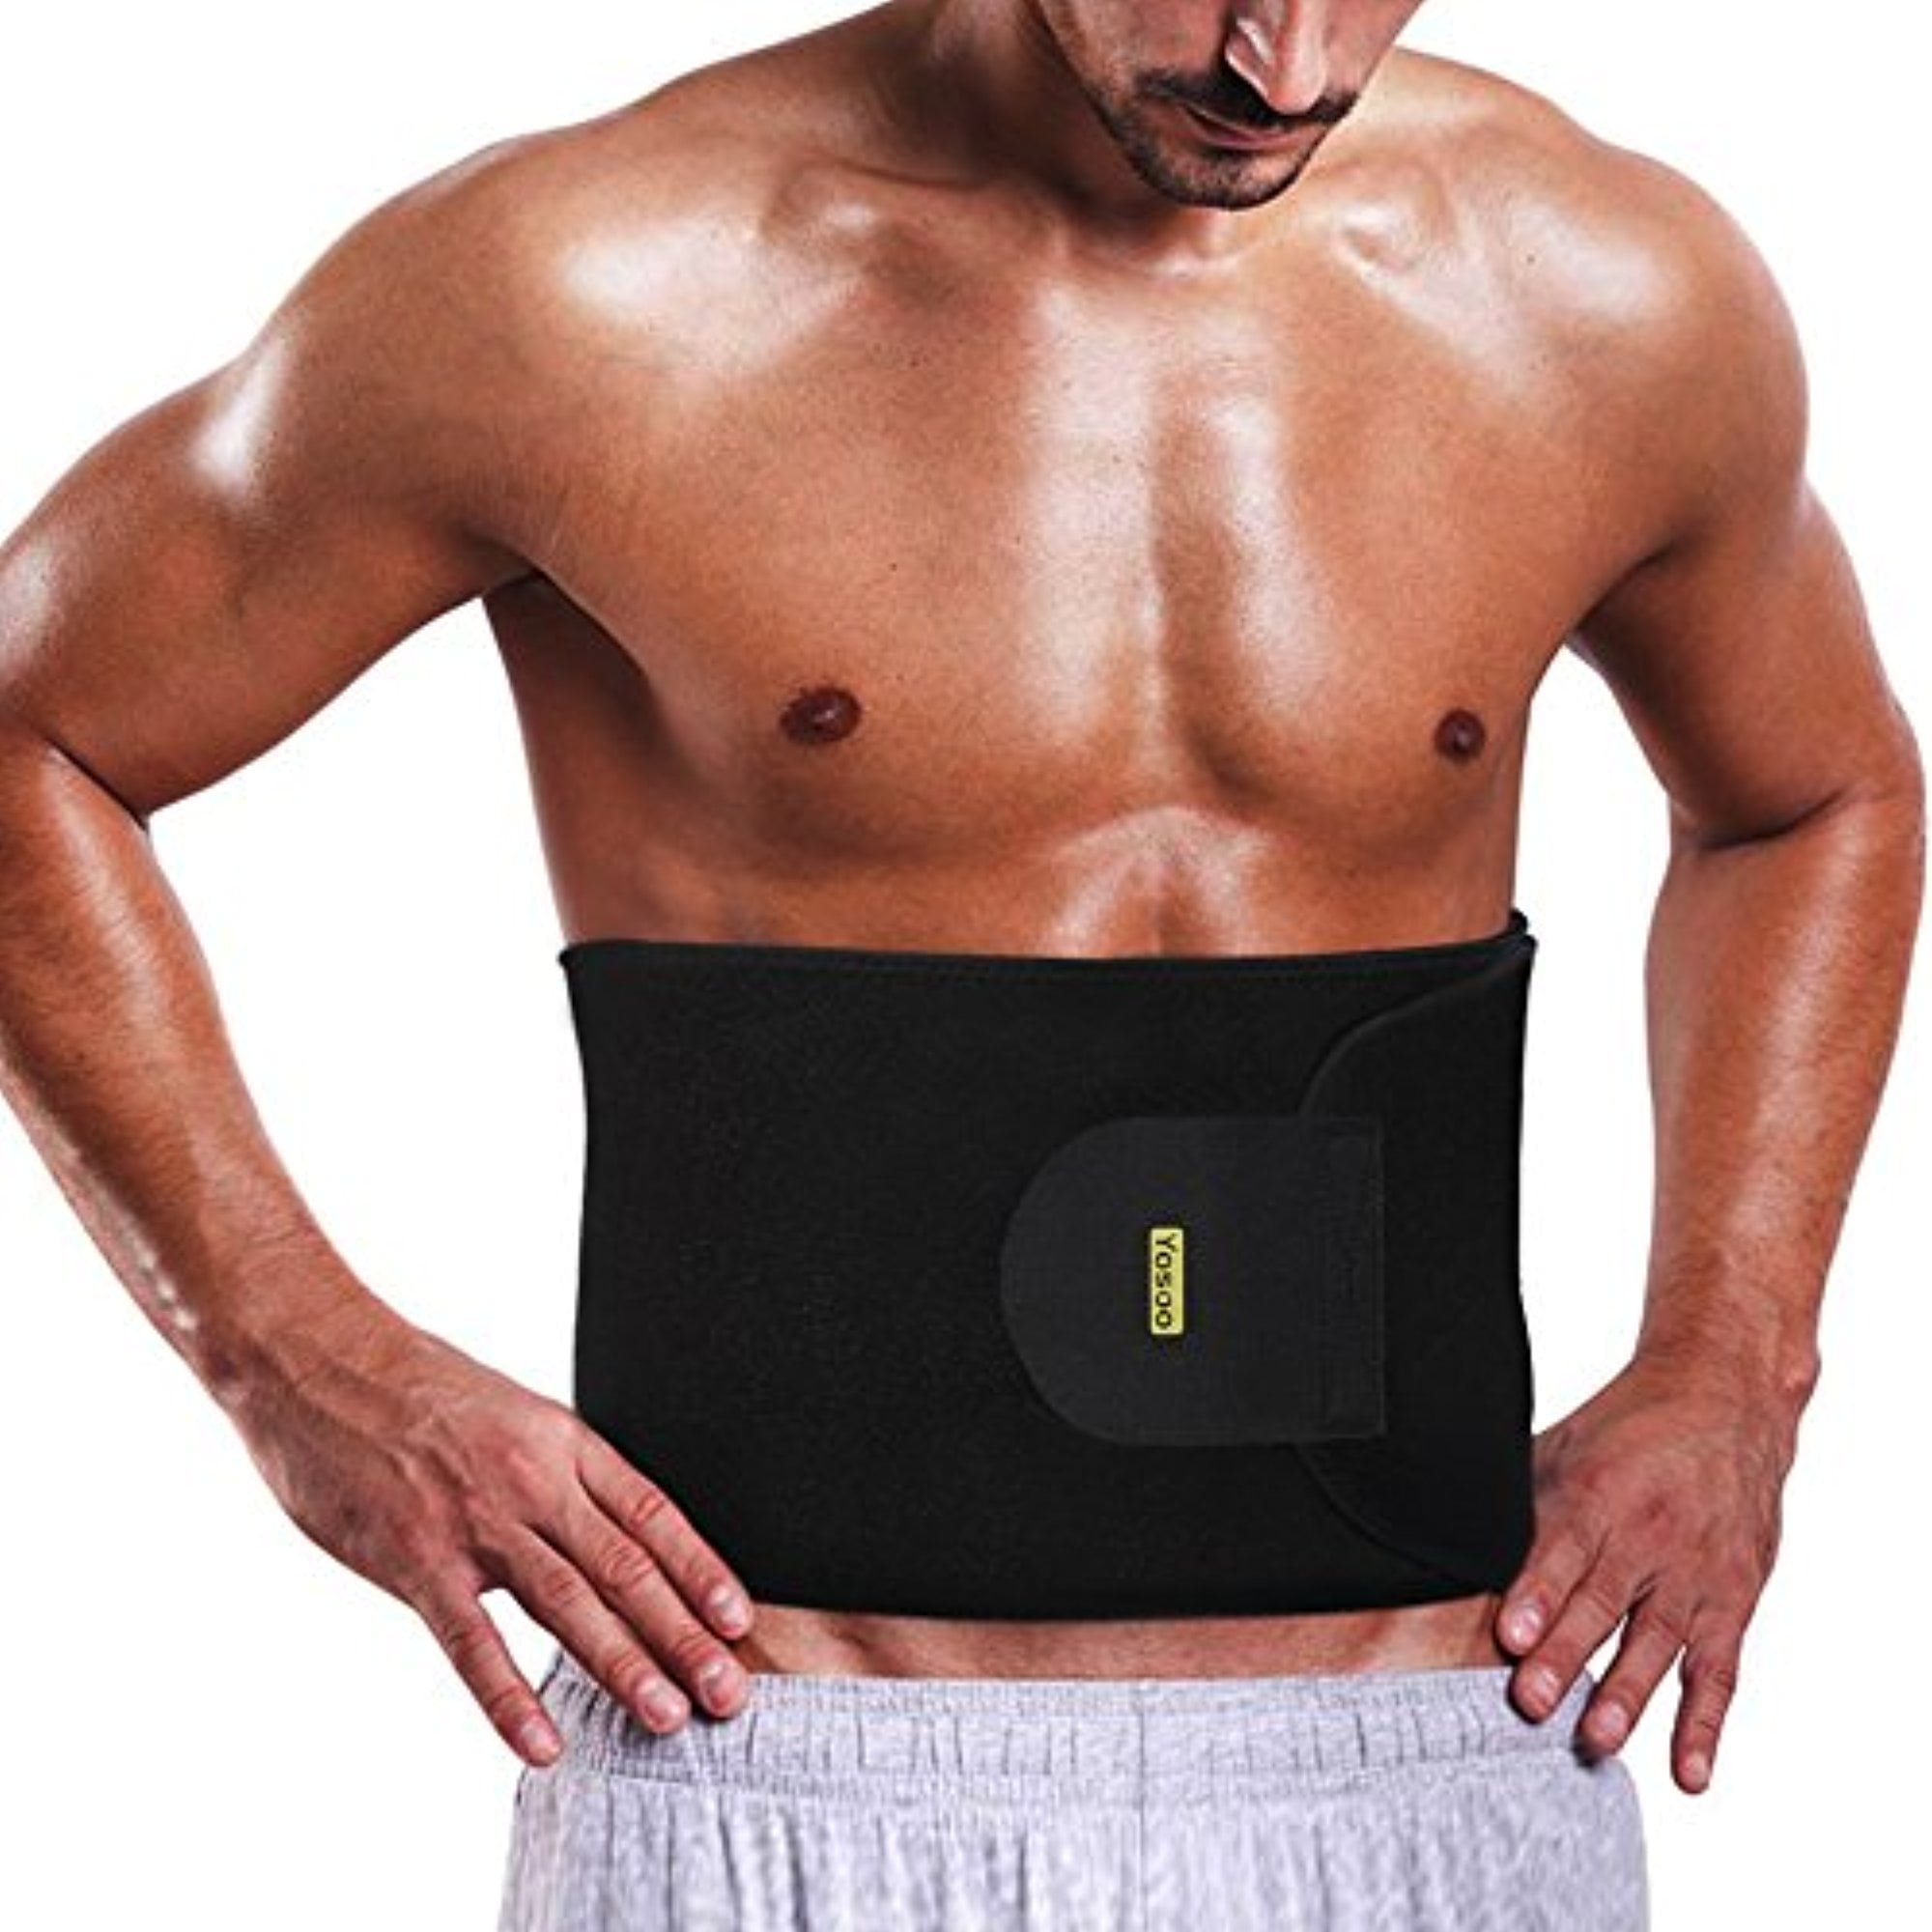 McDavid Waist Trimmer for relieving pain or losing weight supports lower back 